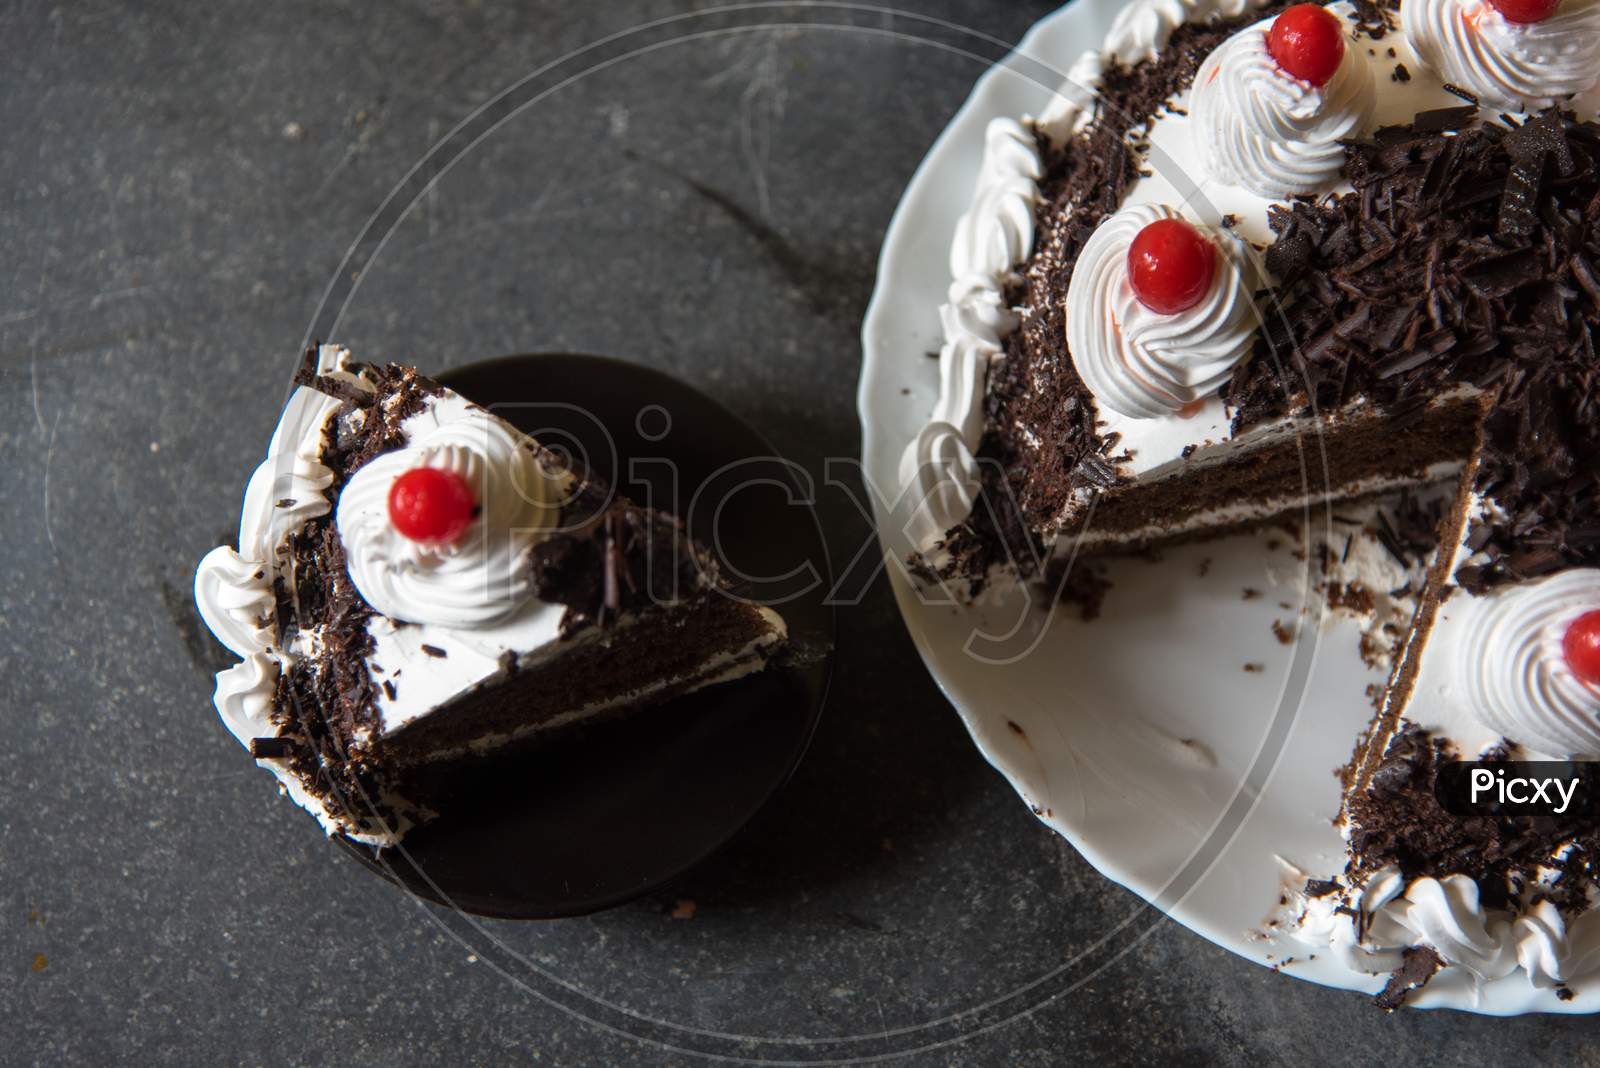 Black Forest Cake And A Slice Of It.